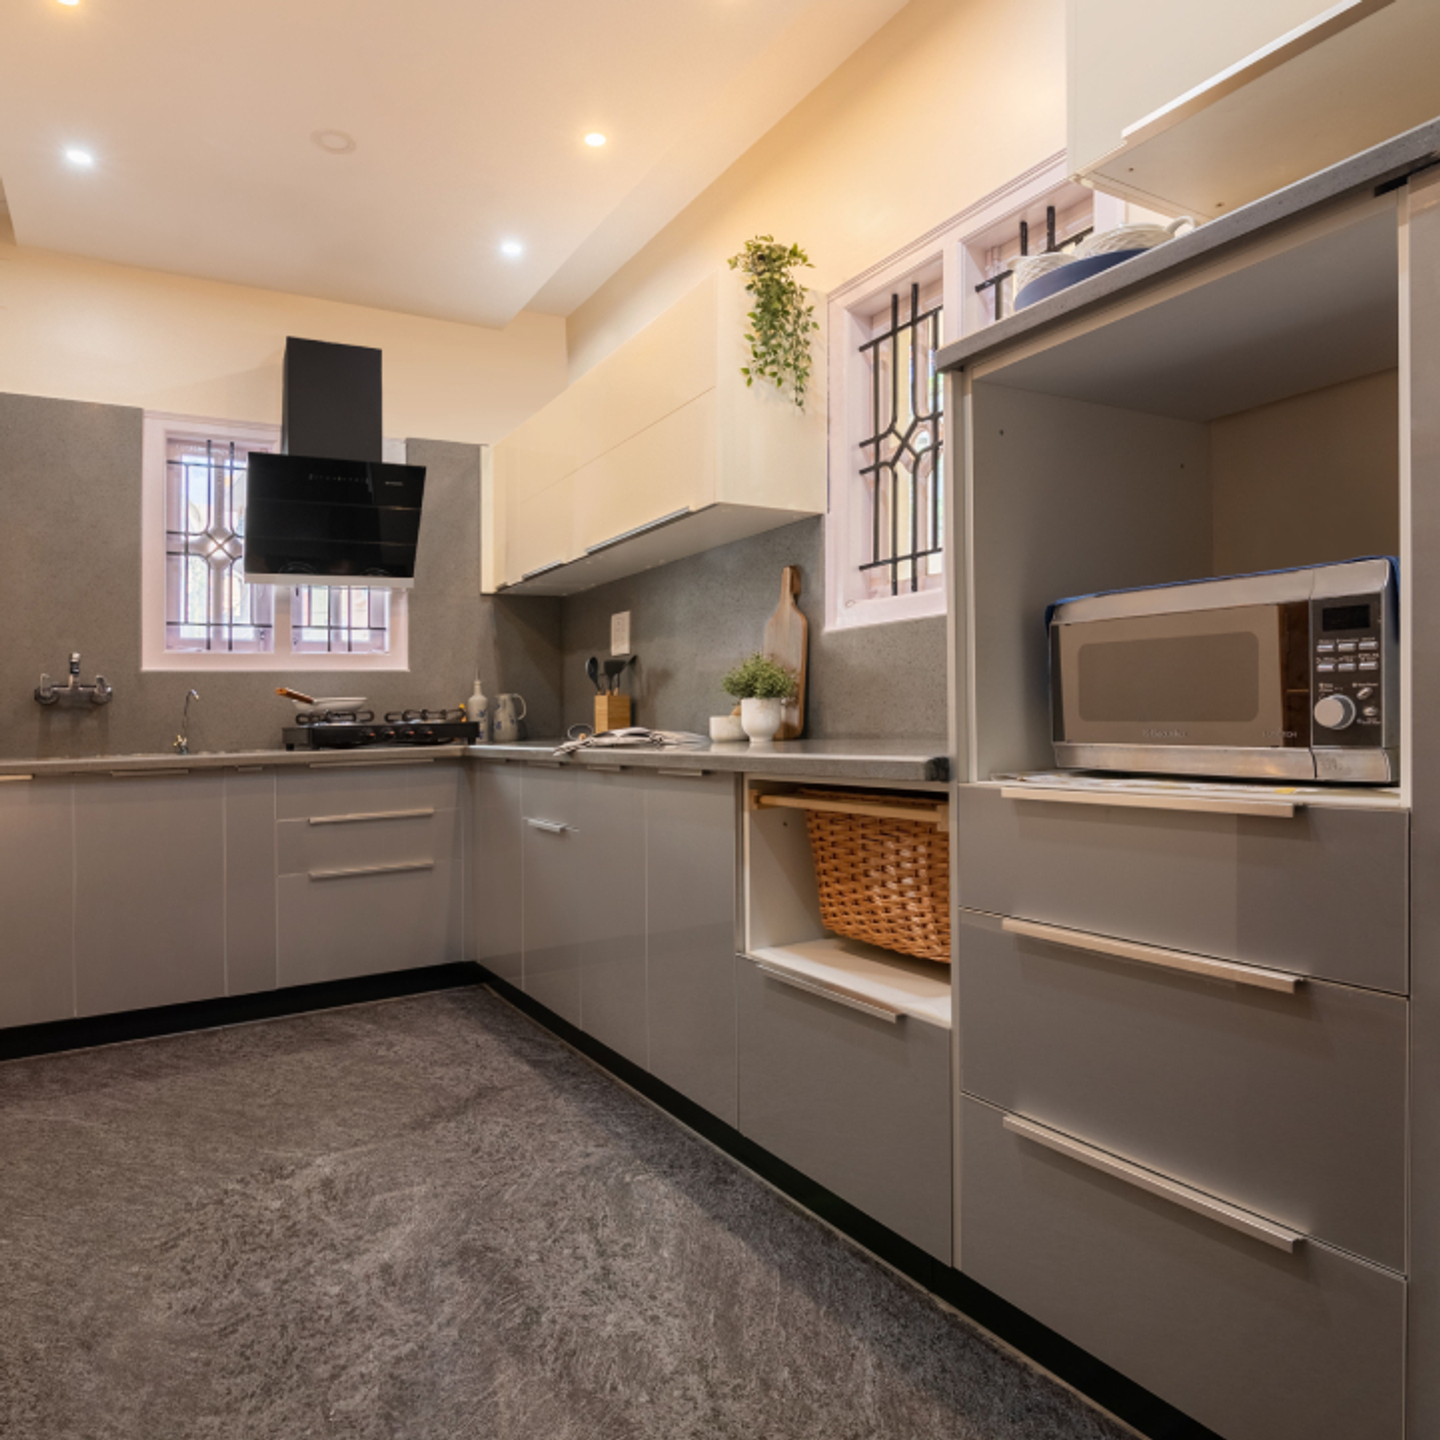 Classic L-Shaped Modular Kitchen Design With Grey Countertop And Storage Cabinets